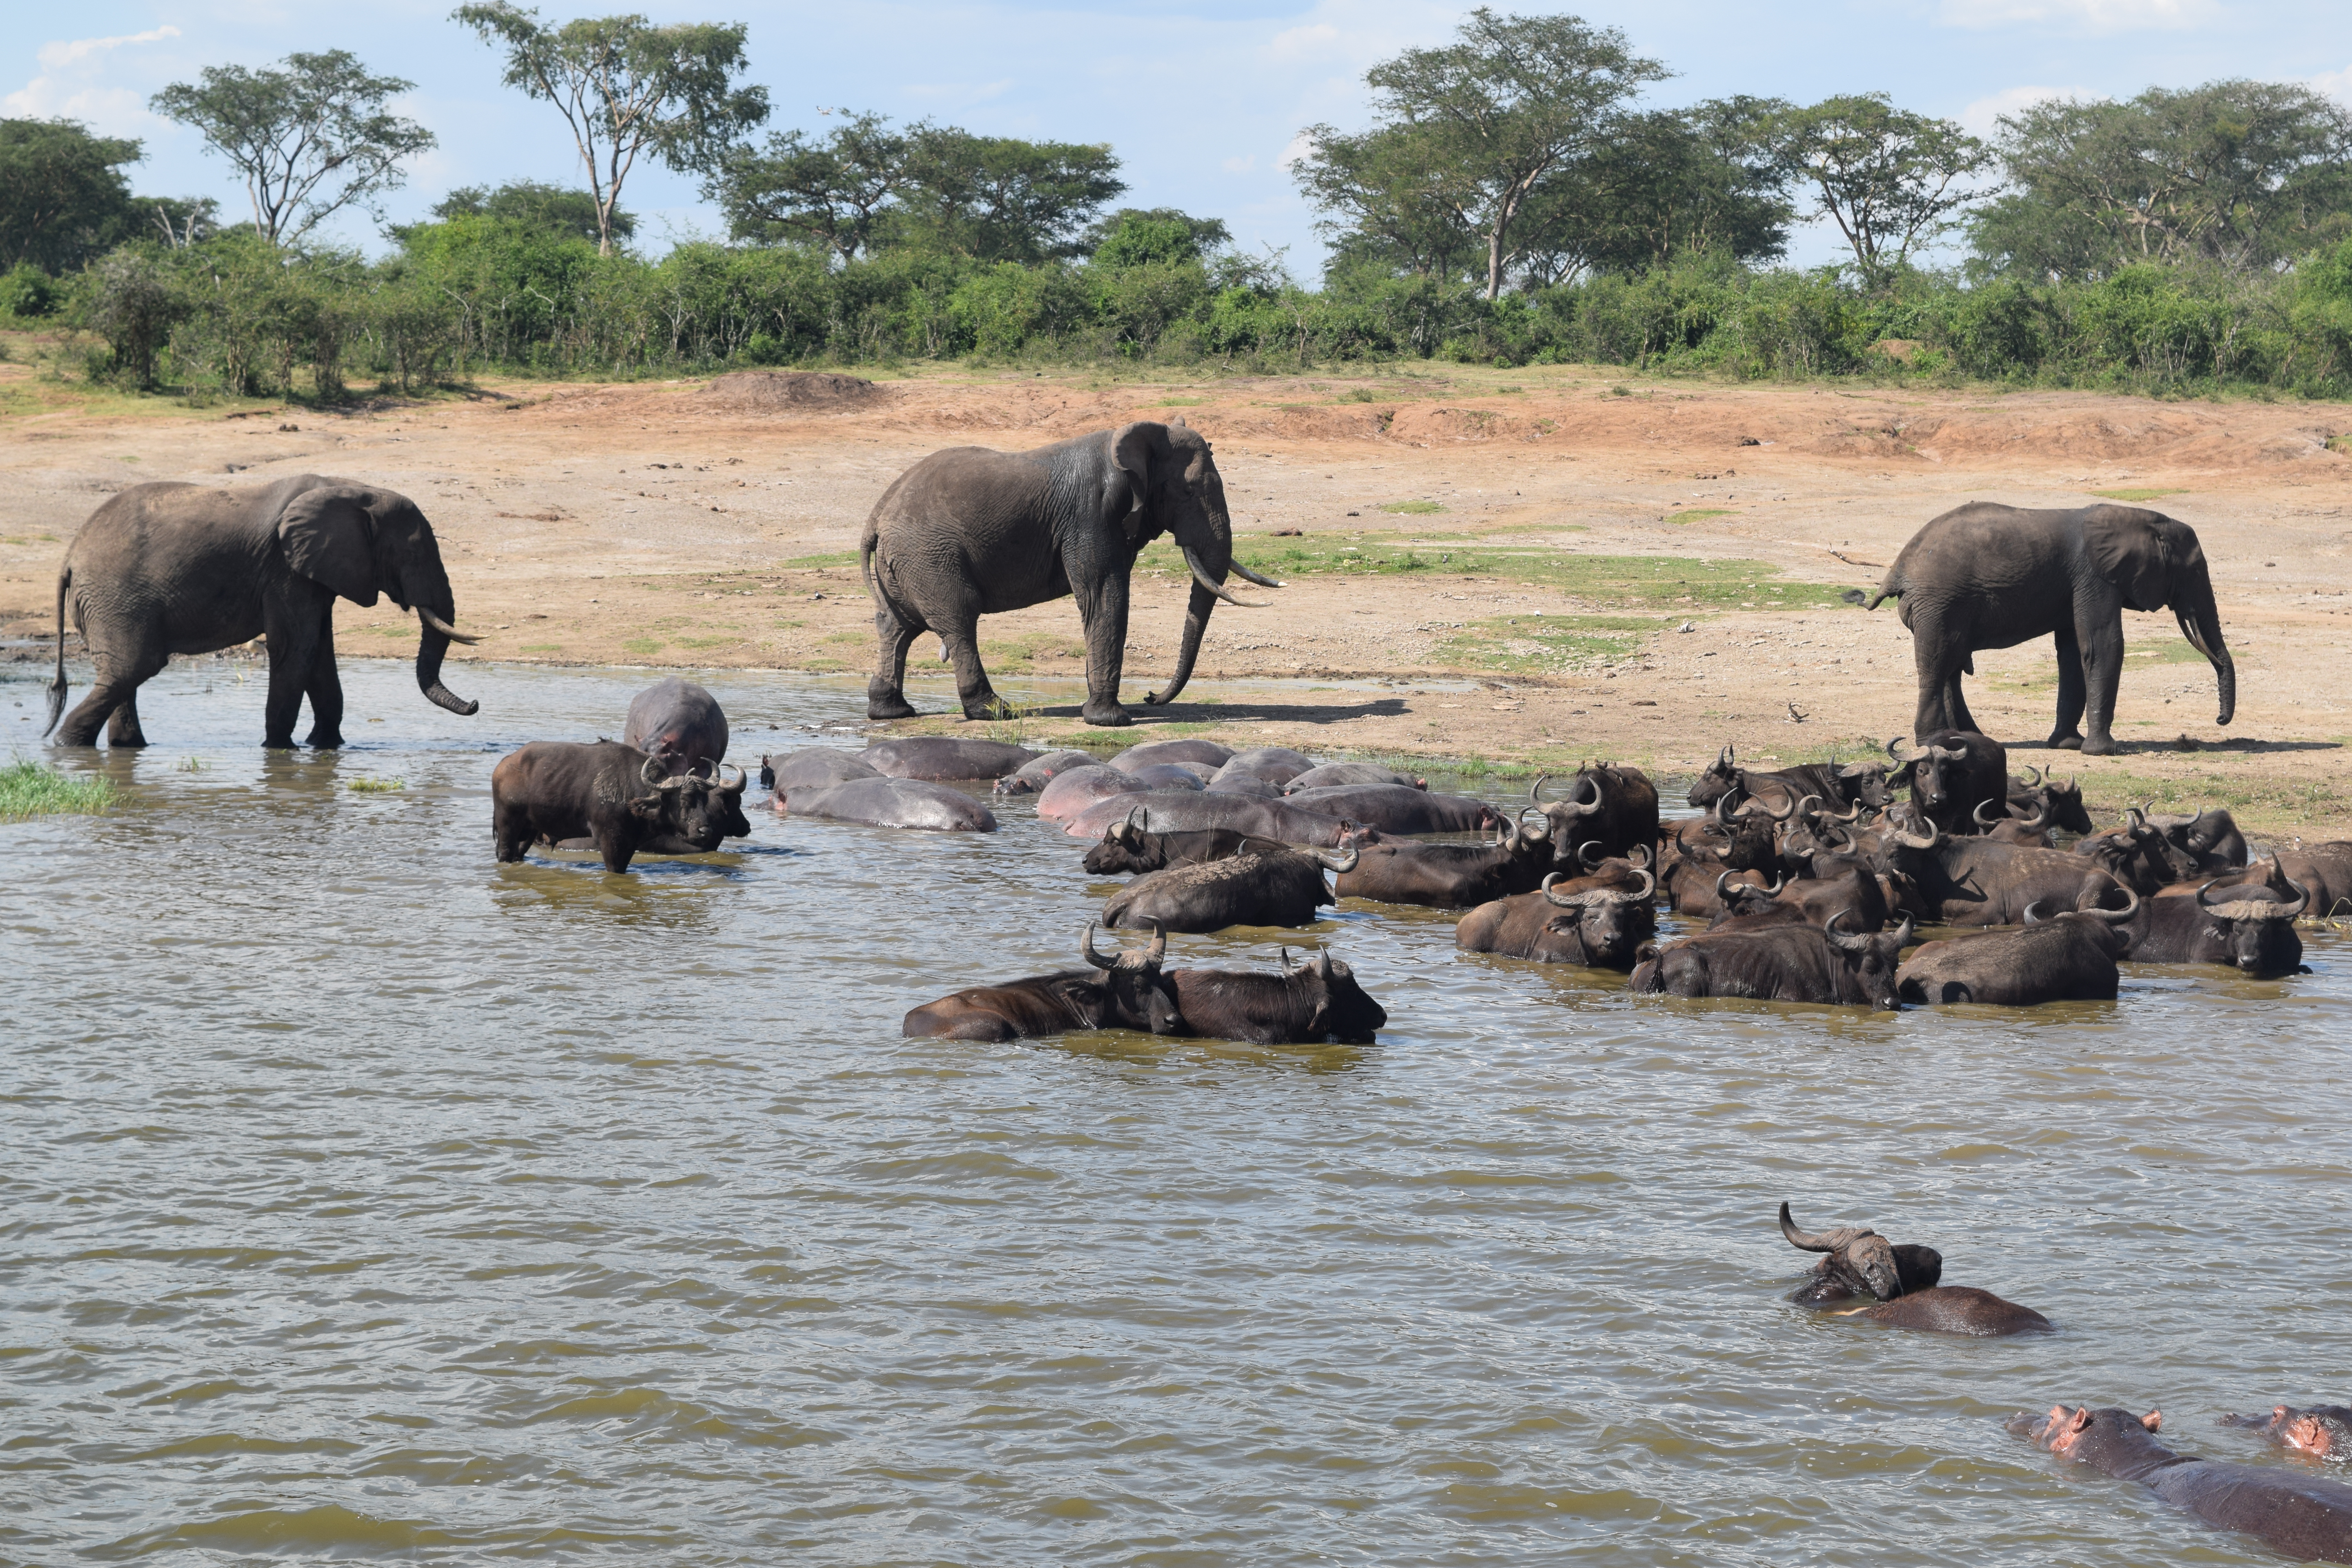 Elephants and wildebeests at a watering hole